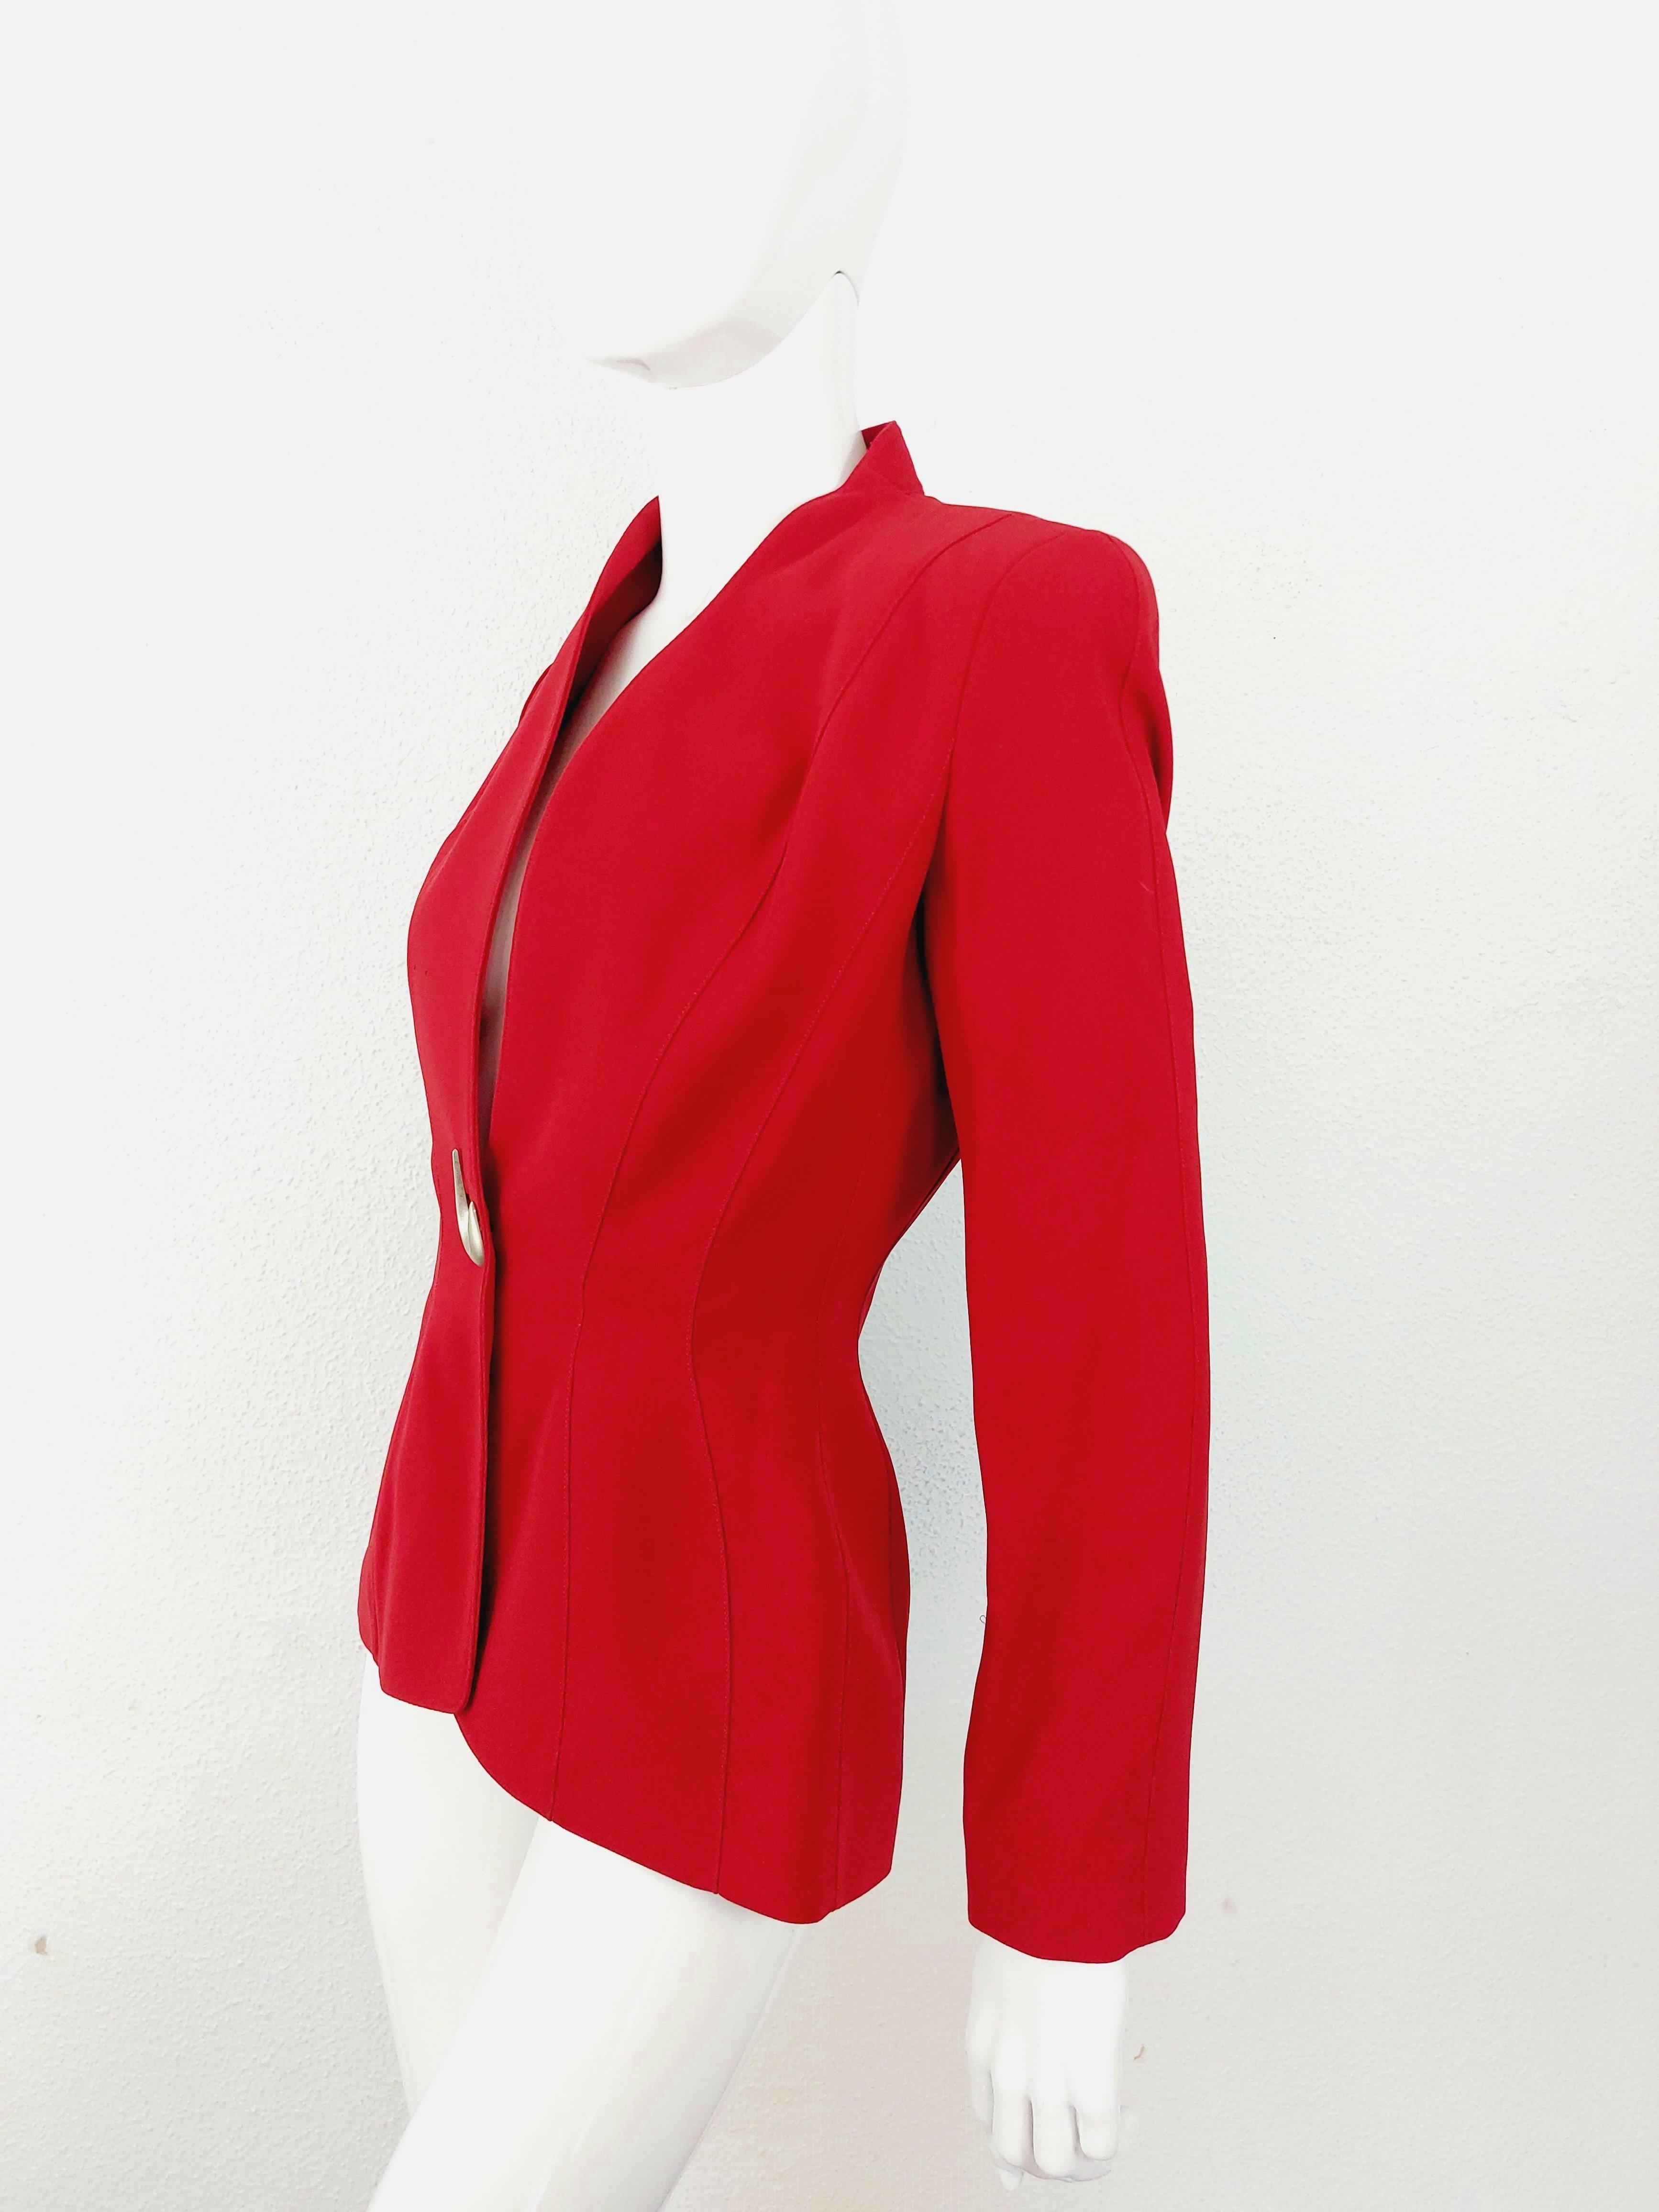 Thierry Mugler Couture 2000 AW Sculptural Red Wasp Pin Brooch Jacket Blazer 5